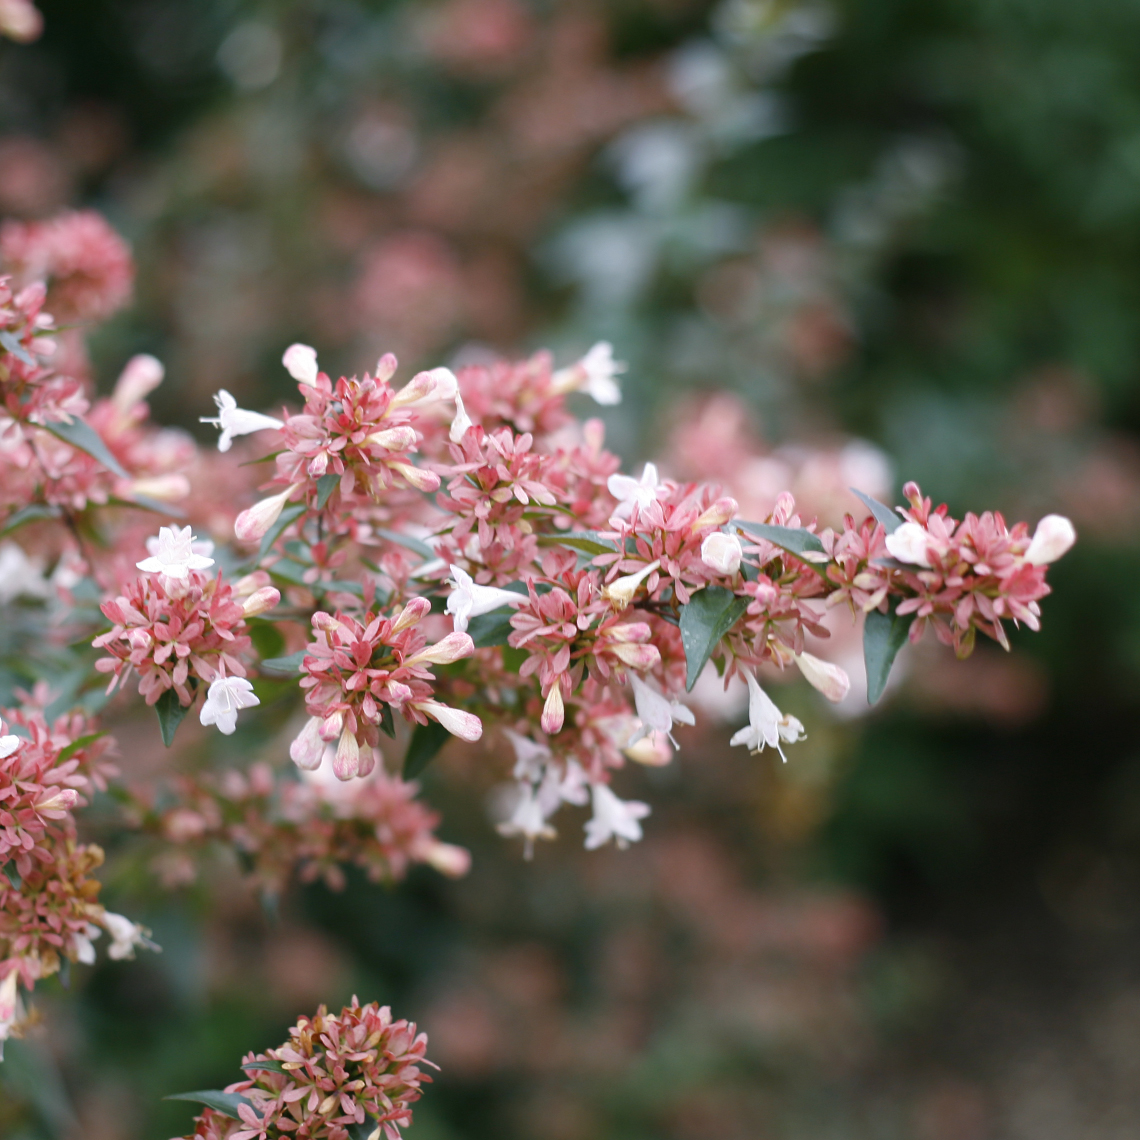 Close up of Ruby Anniversary Abelia's red-pink bracts and white flowers